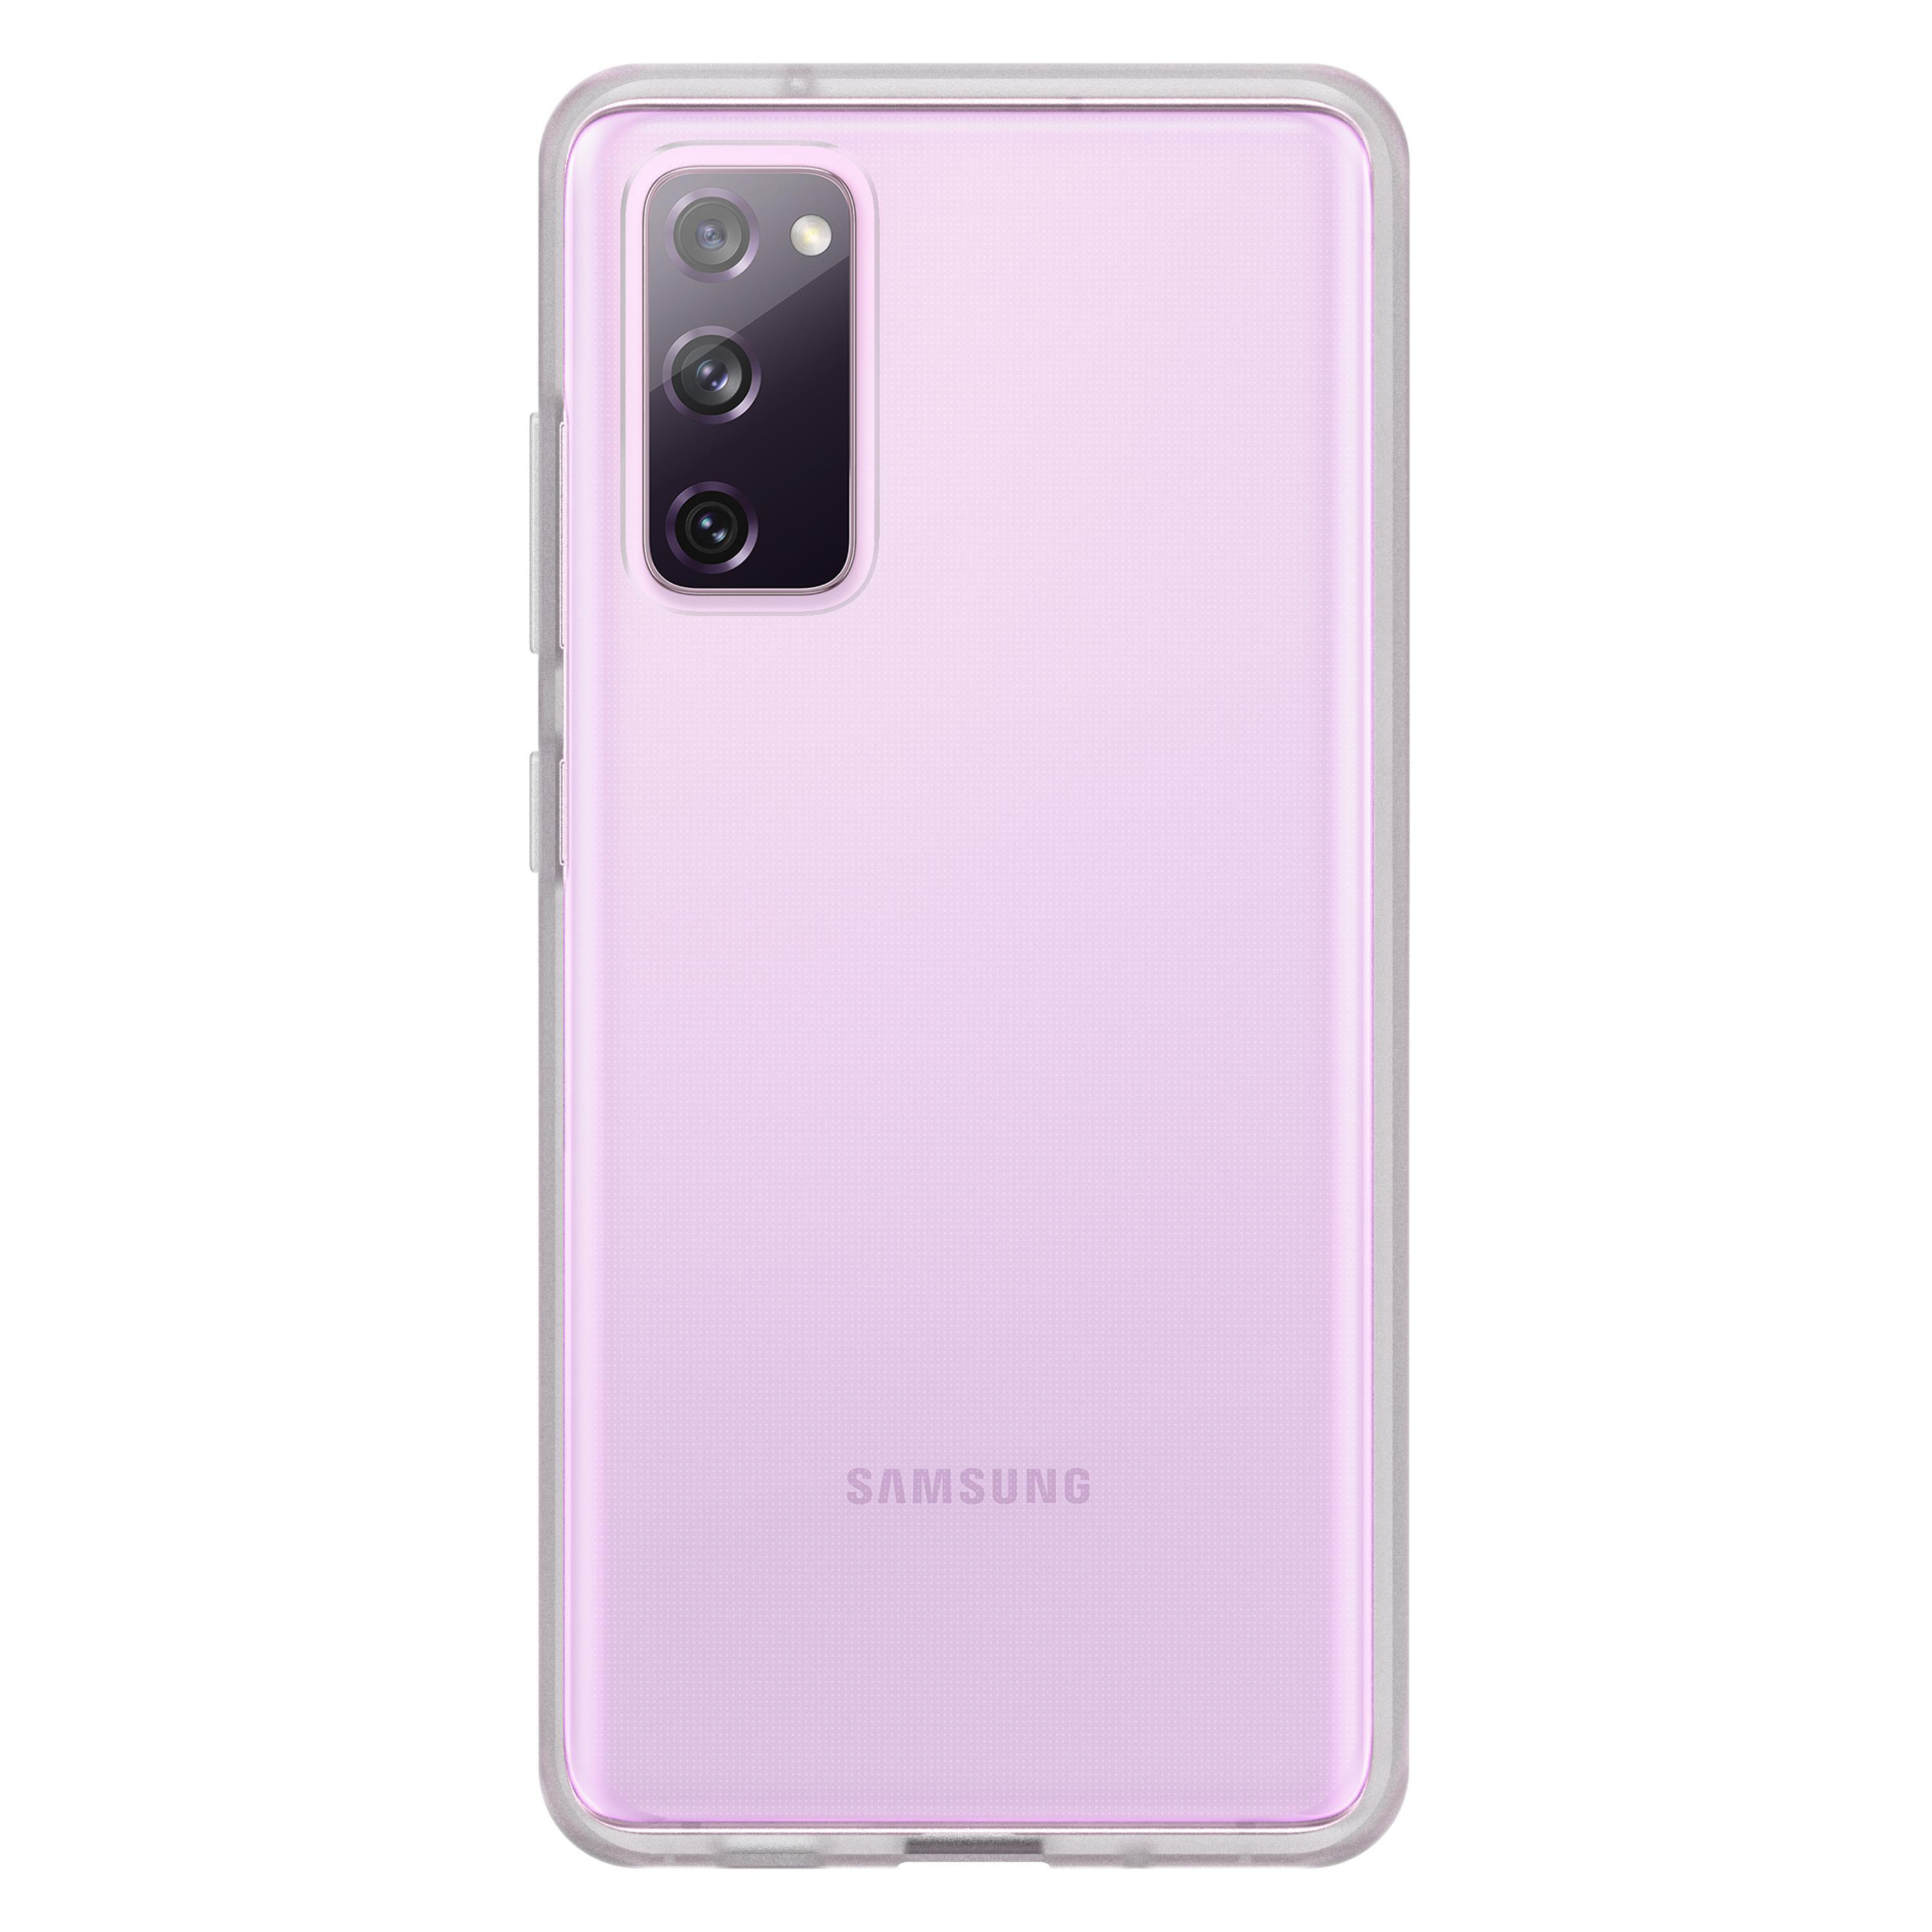 5G, Series S20 Trusted Samsung, Glass, Transparent React + OTTERBOX FE Galaxy Backcover,